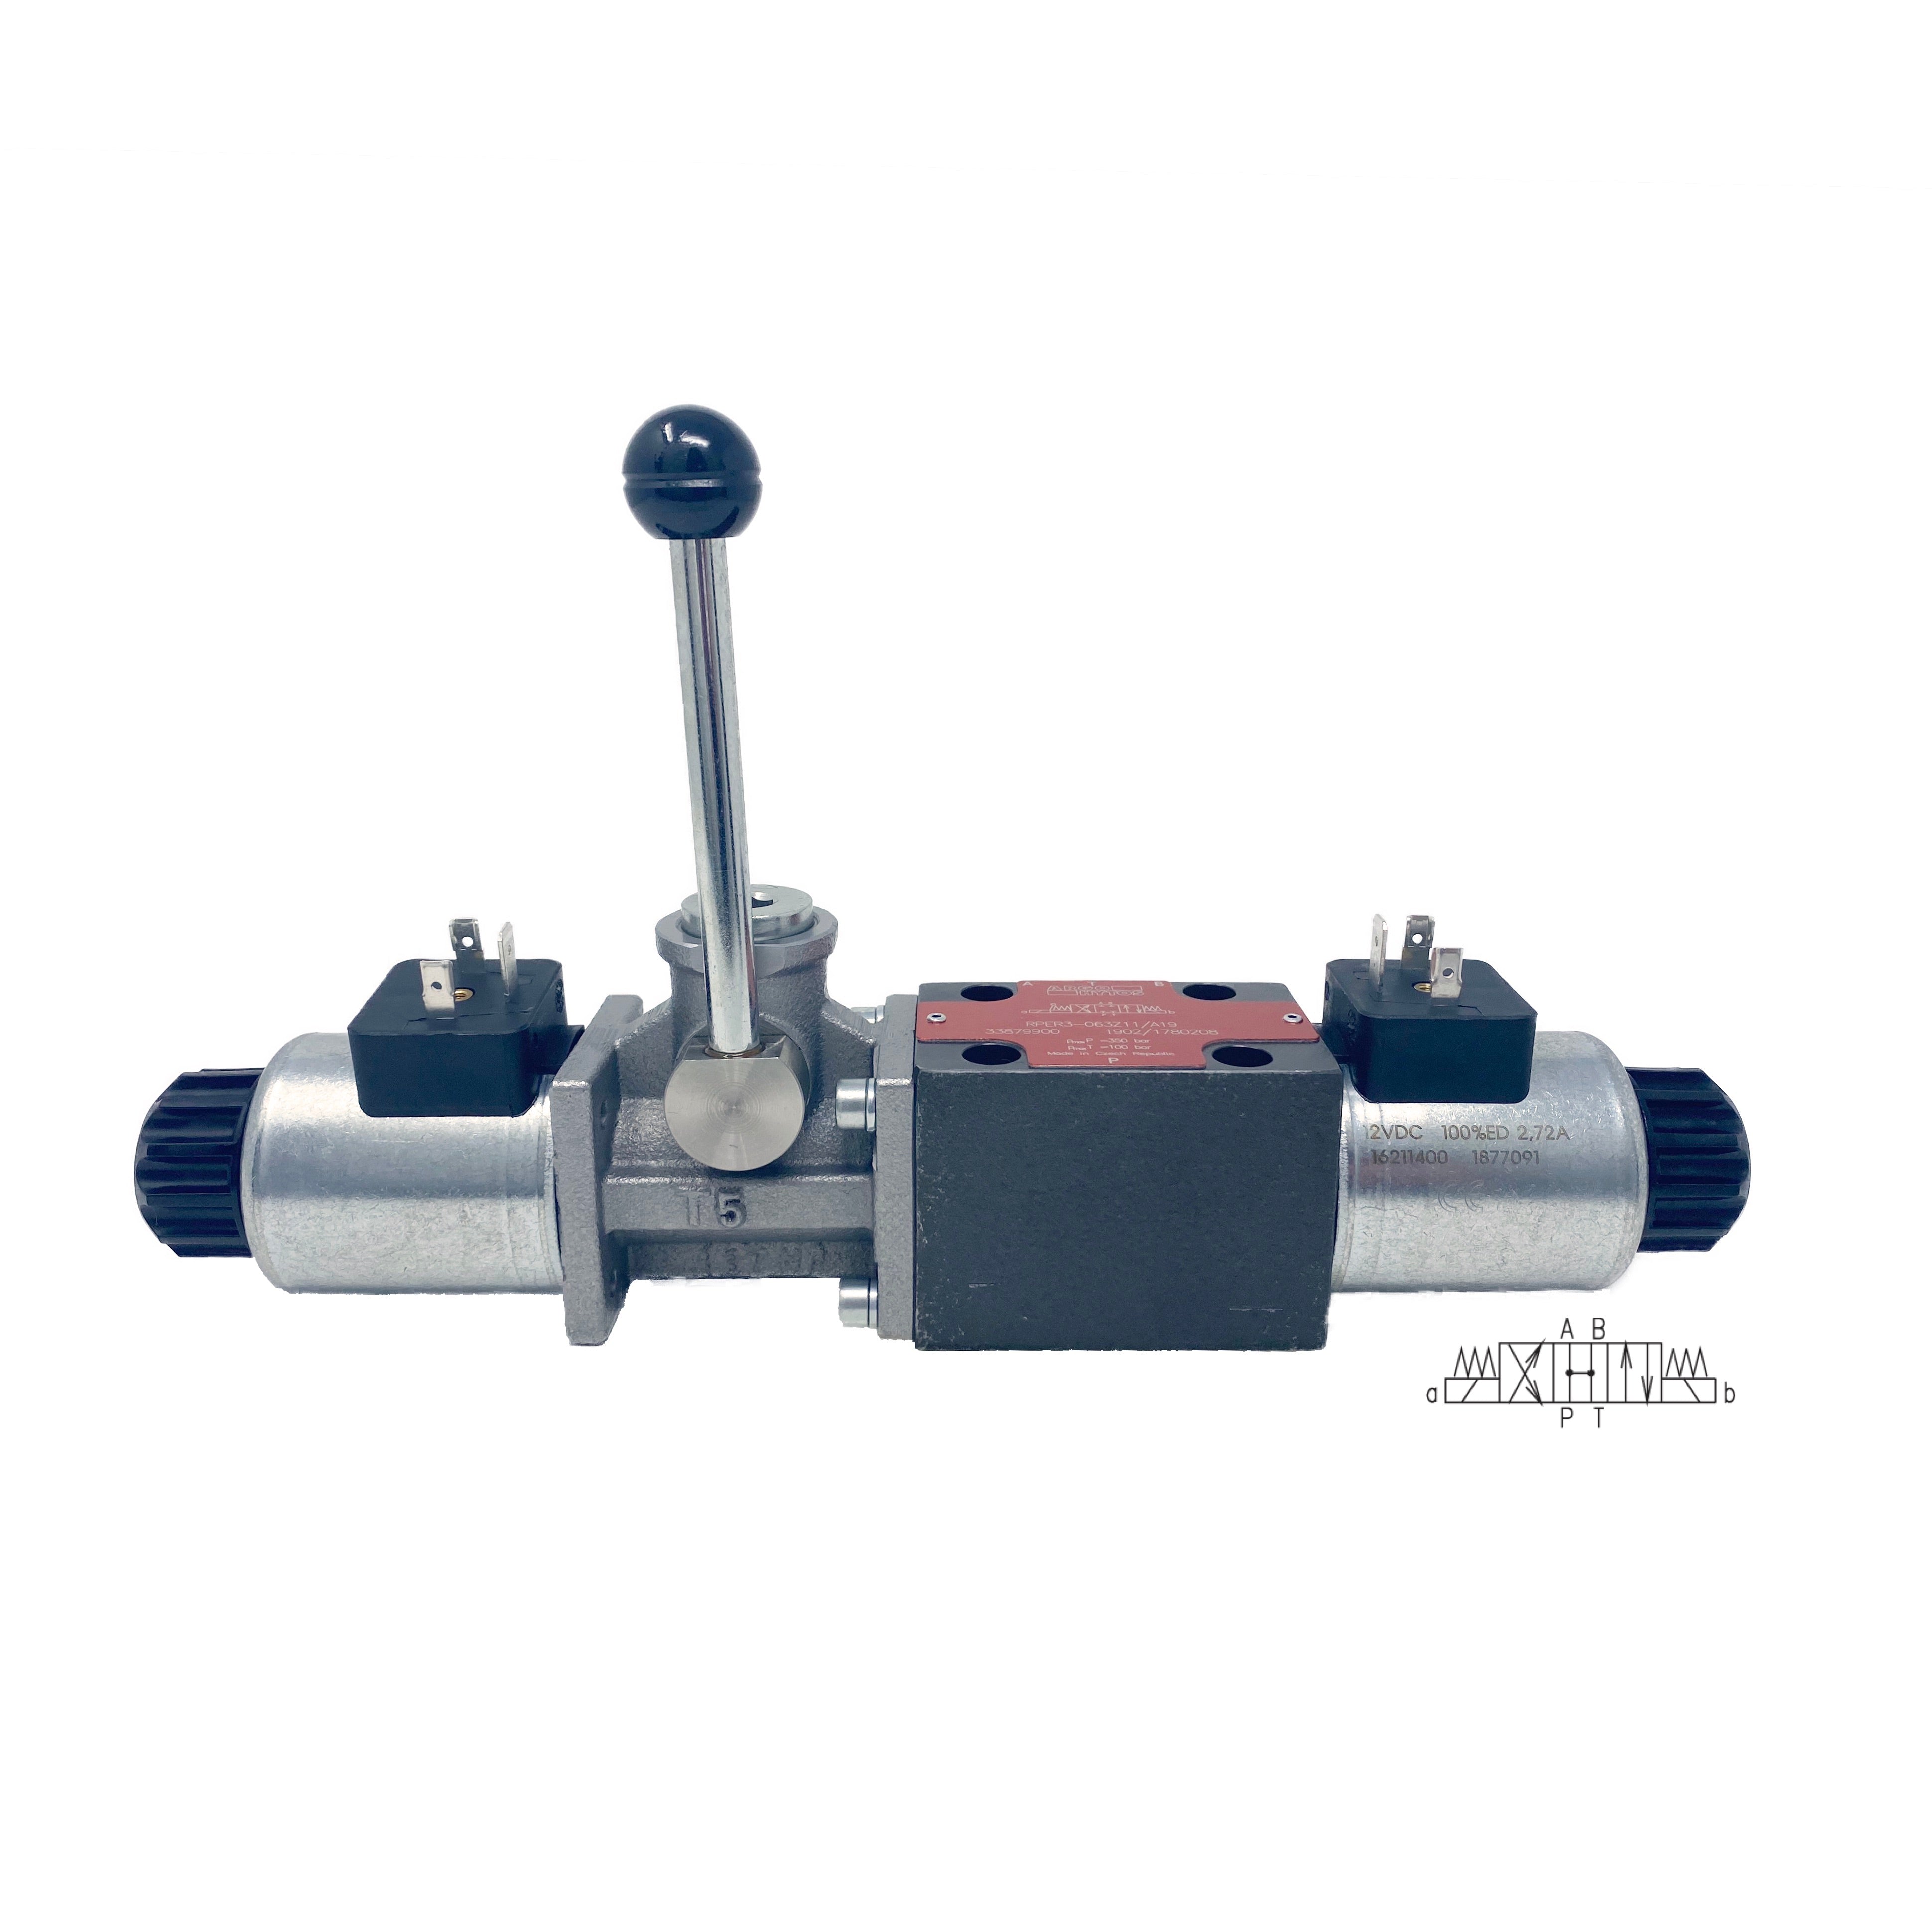 RPER3-063H11/02400E1/A19 : Argo Directional Control Valve w/ Override Lever, D03, 21GPM, 5100psi, 3P4W, 24 VDC, DIN, Spring Centered, All Ports Open in Neutral